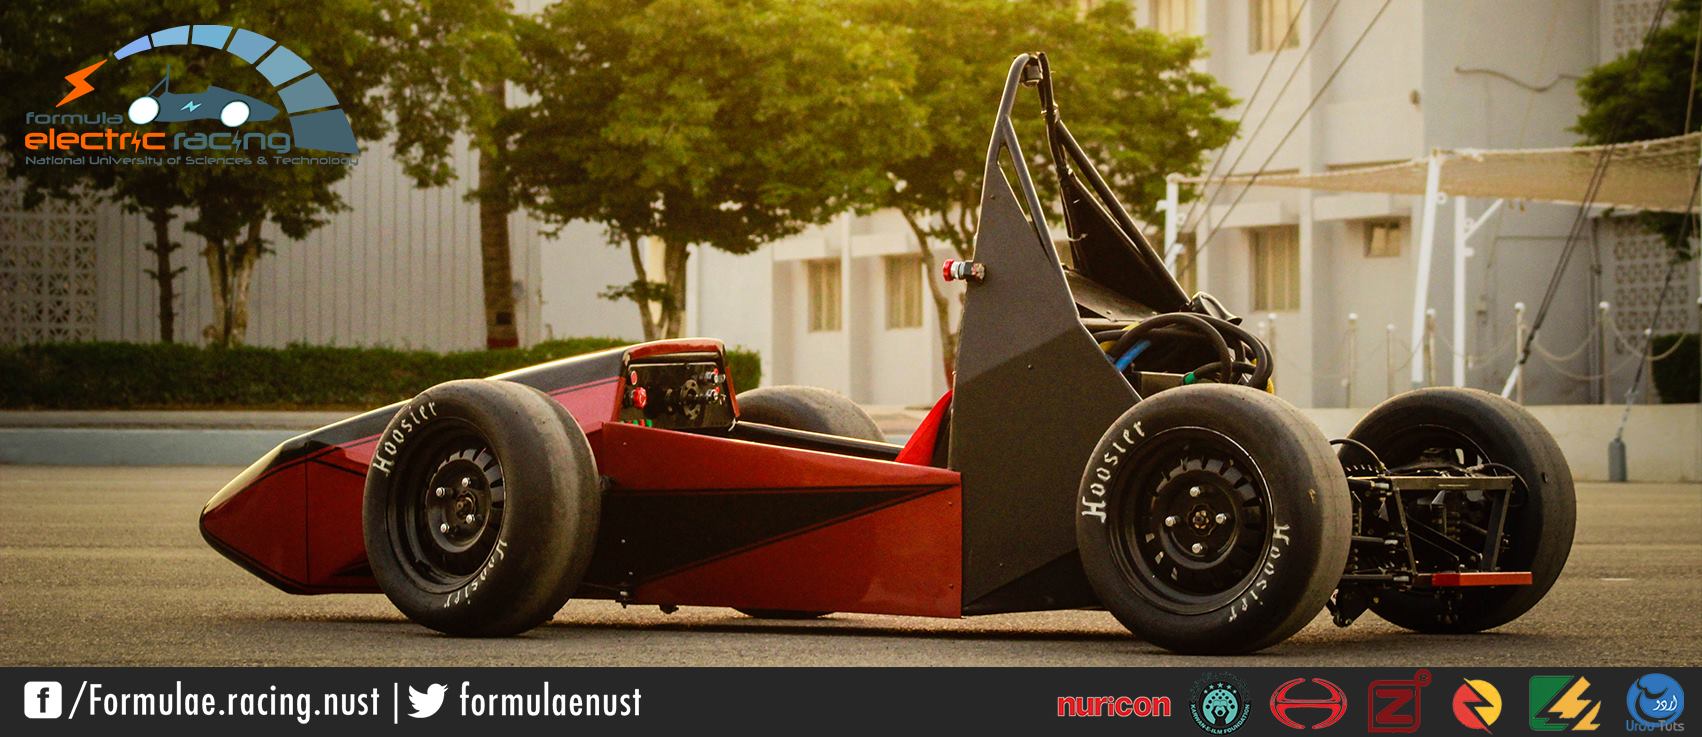 Pakistan’s First Formula Electric Car to Participate in US Contest